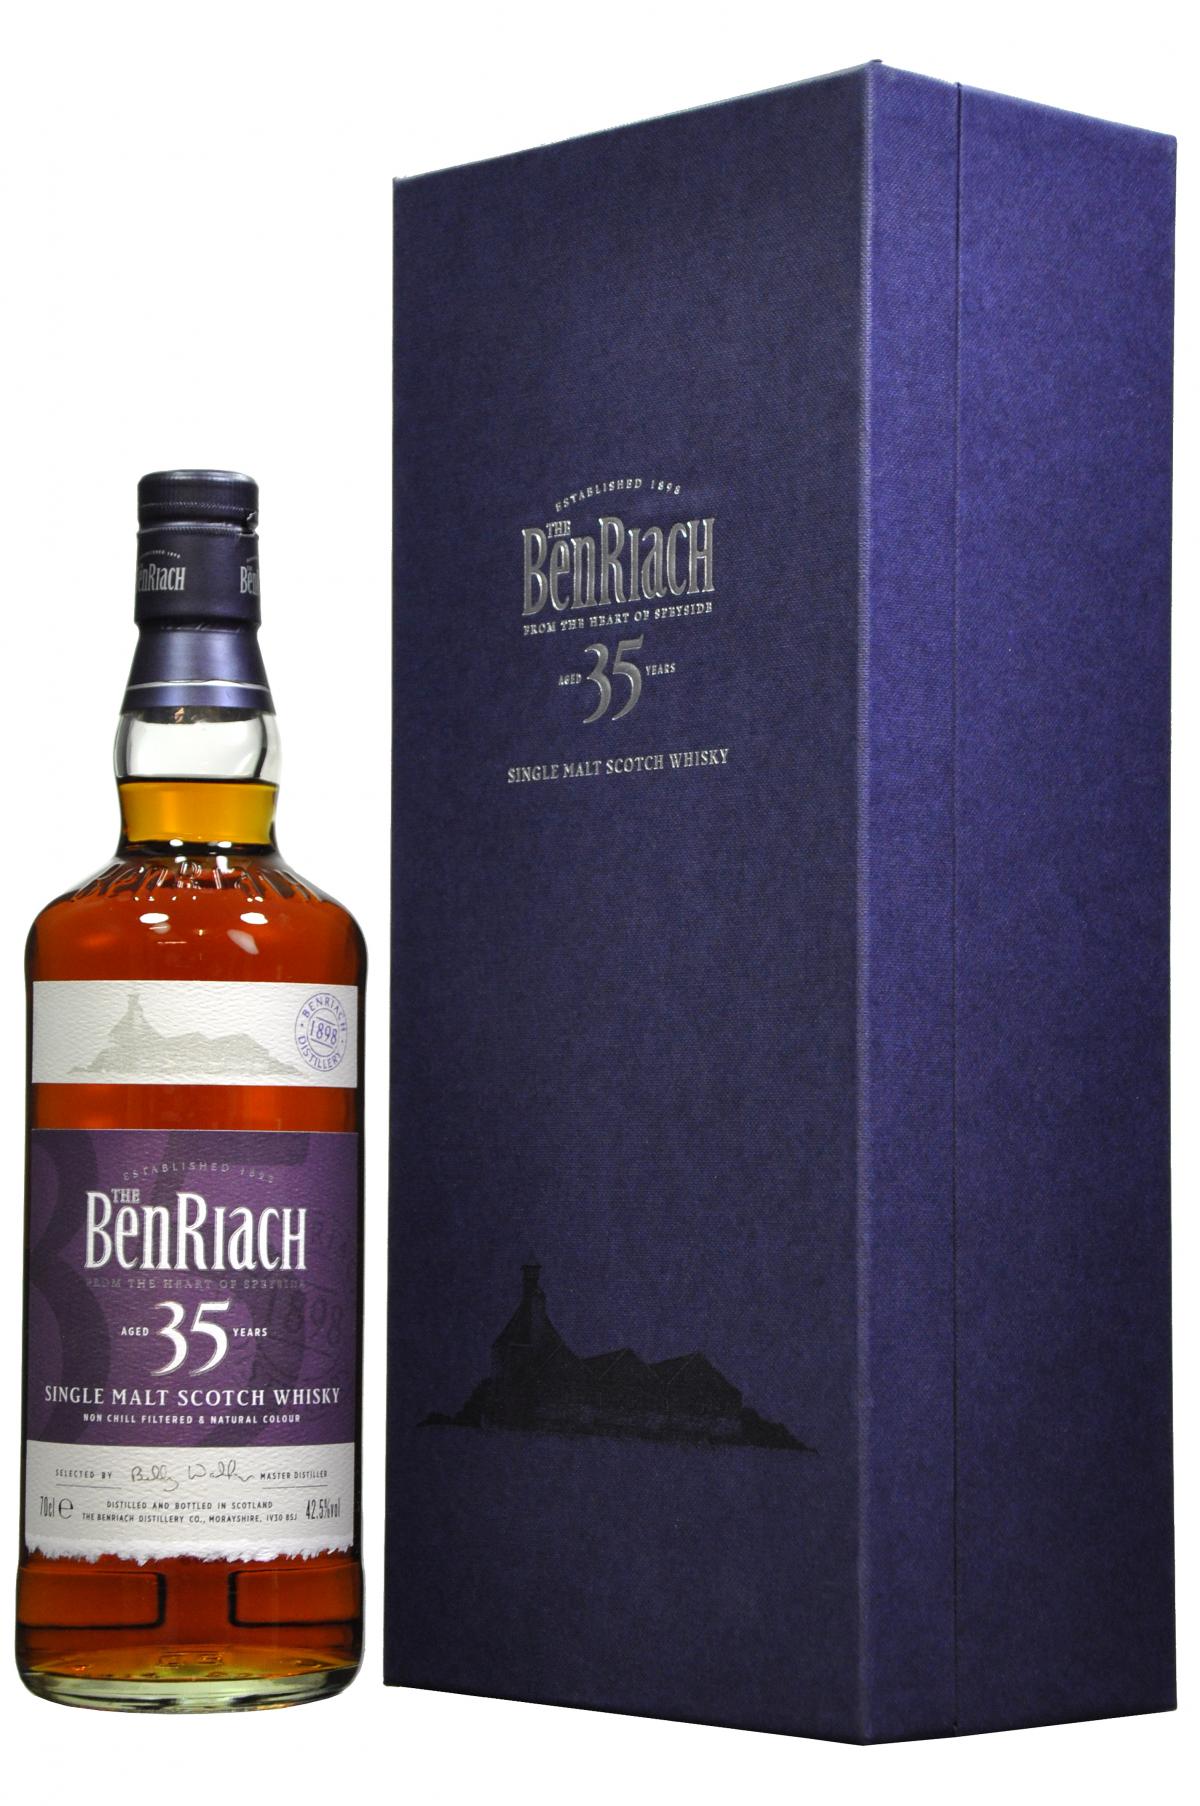 benriach 35 year old speyside single malt scotch whisky which replaces the discontinued 30YO